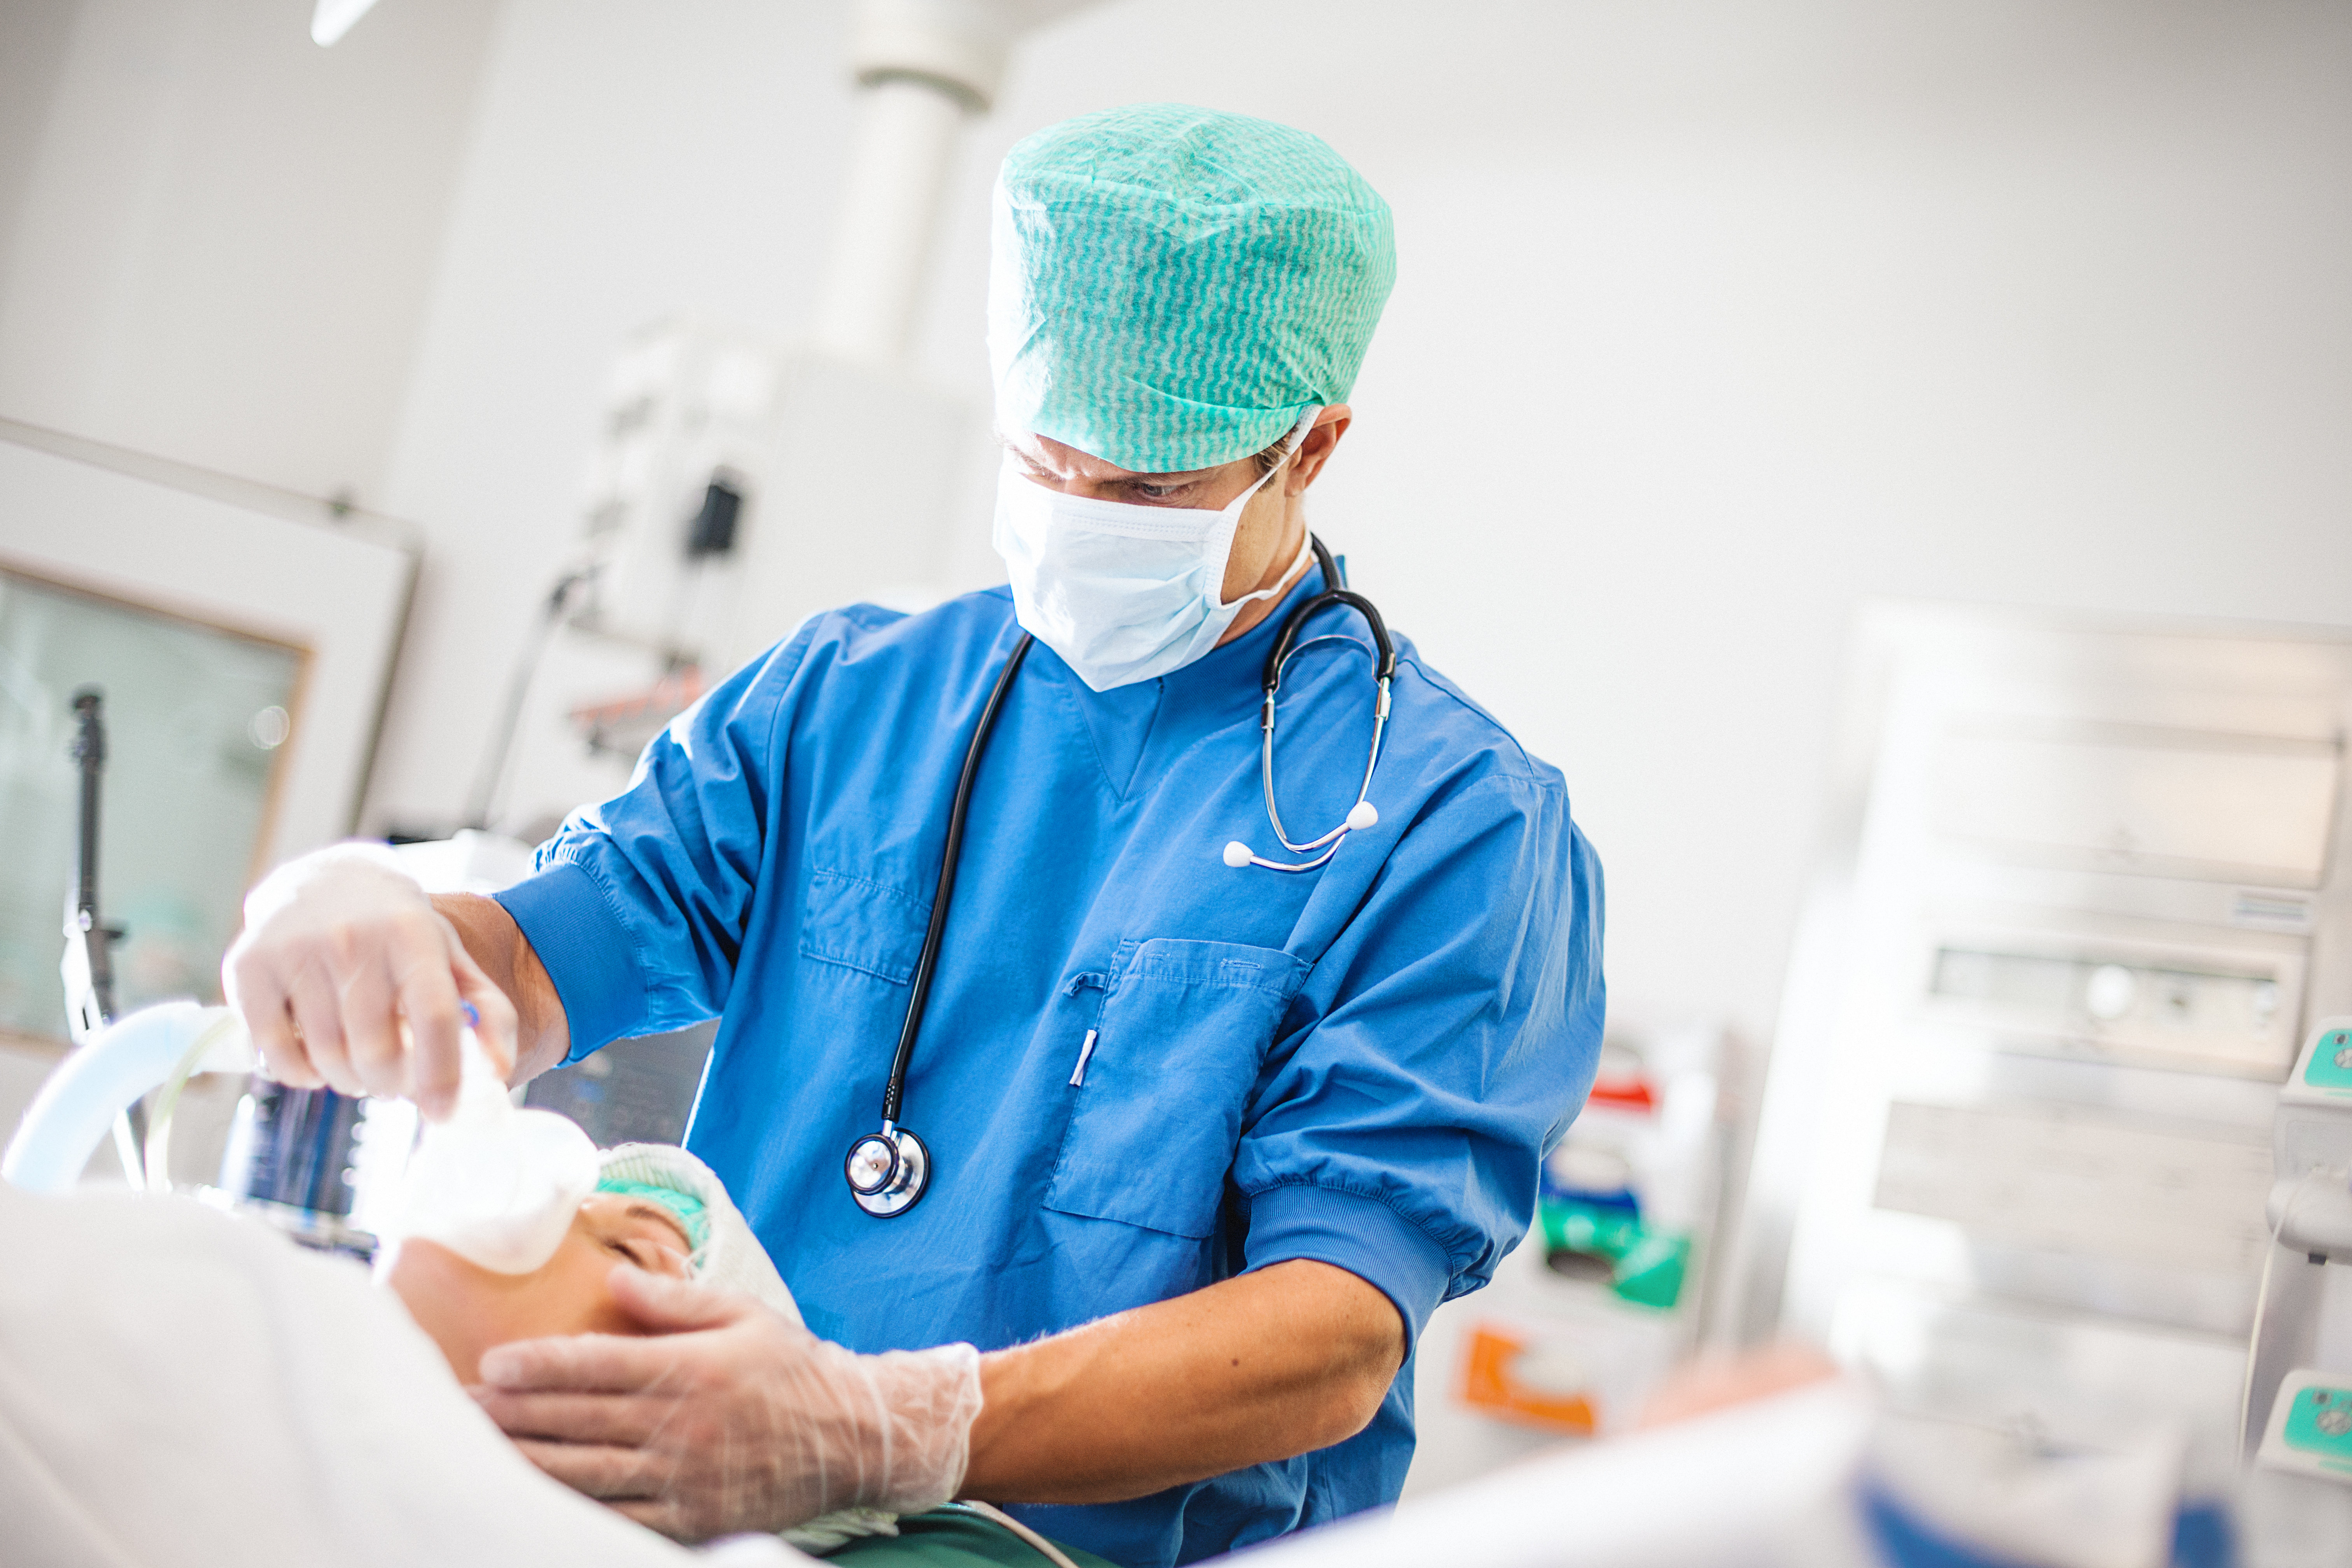 Study suggests steps to curb anesthesia-related adverse events